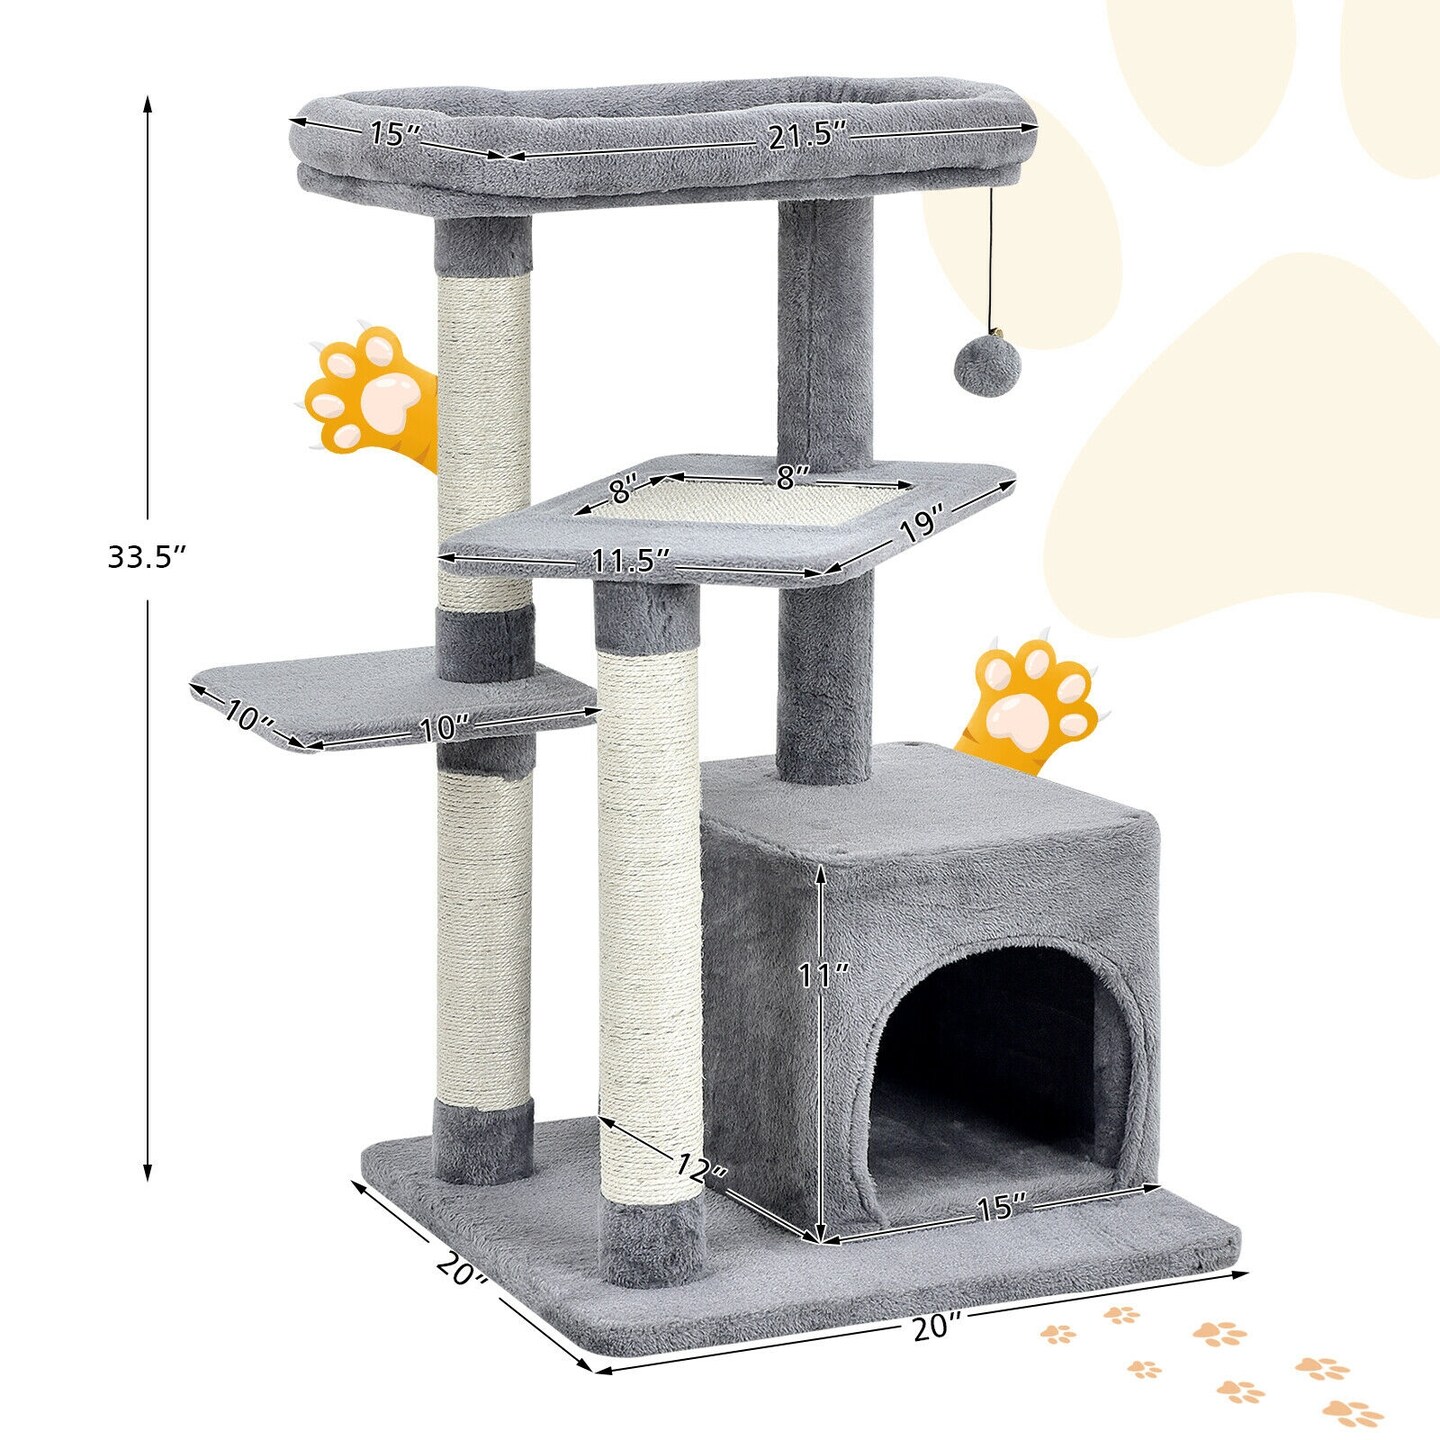 Cat Tree with Perch and Hanging Ball for Indoor Activity Play and Rest-Gray